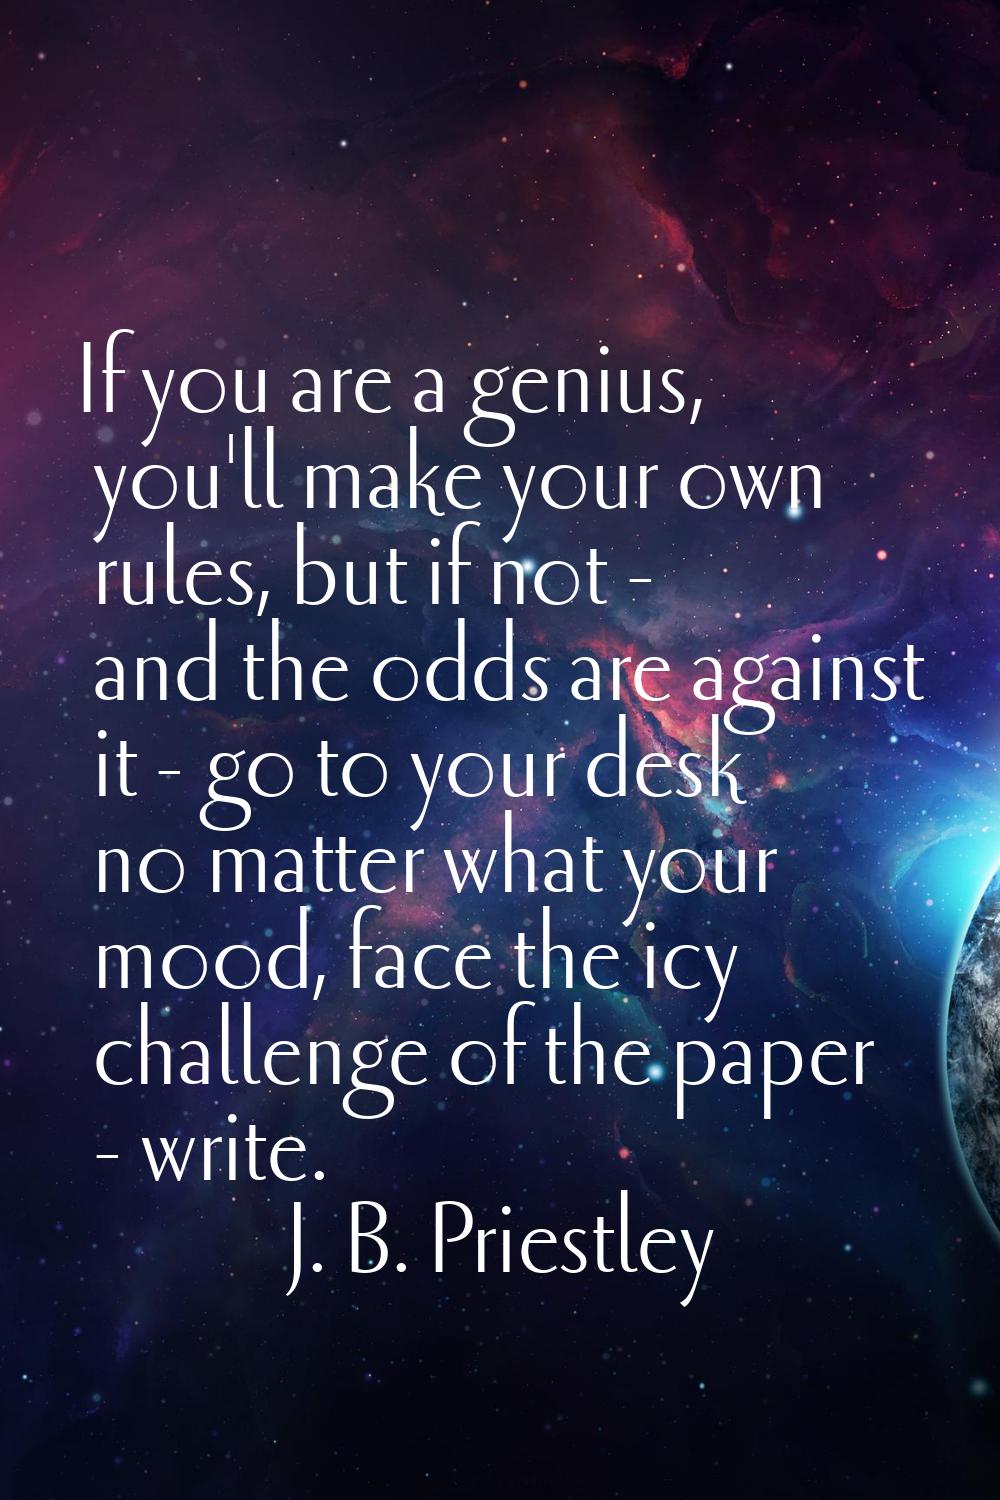 If you are a genius, you'll make your own rules, but if not - and the odds are against it - go to y